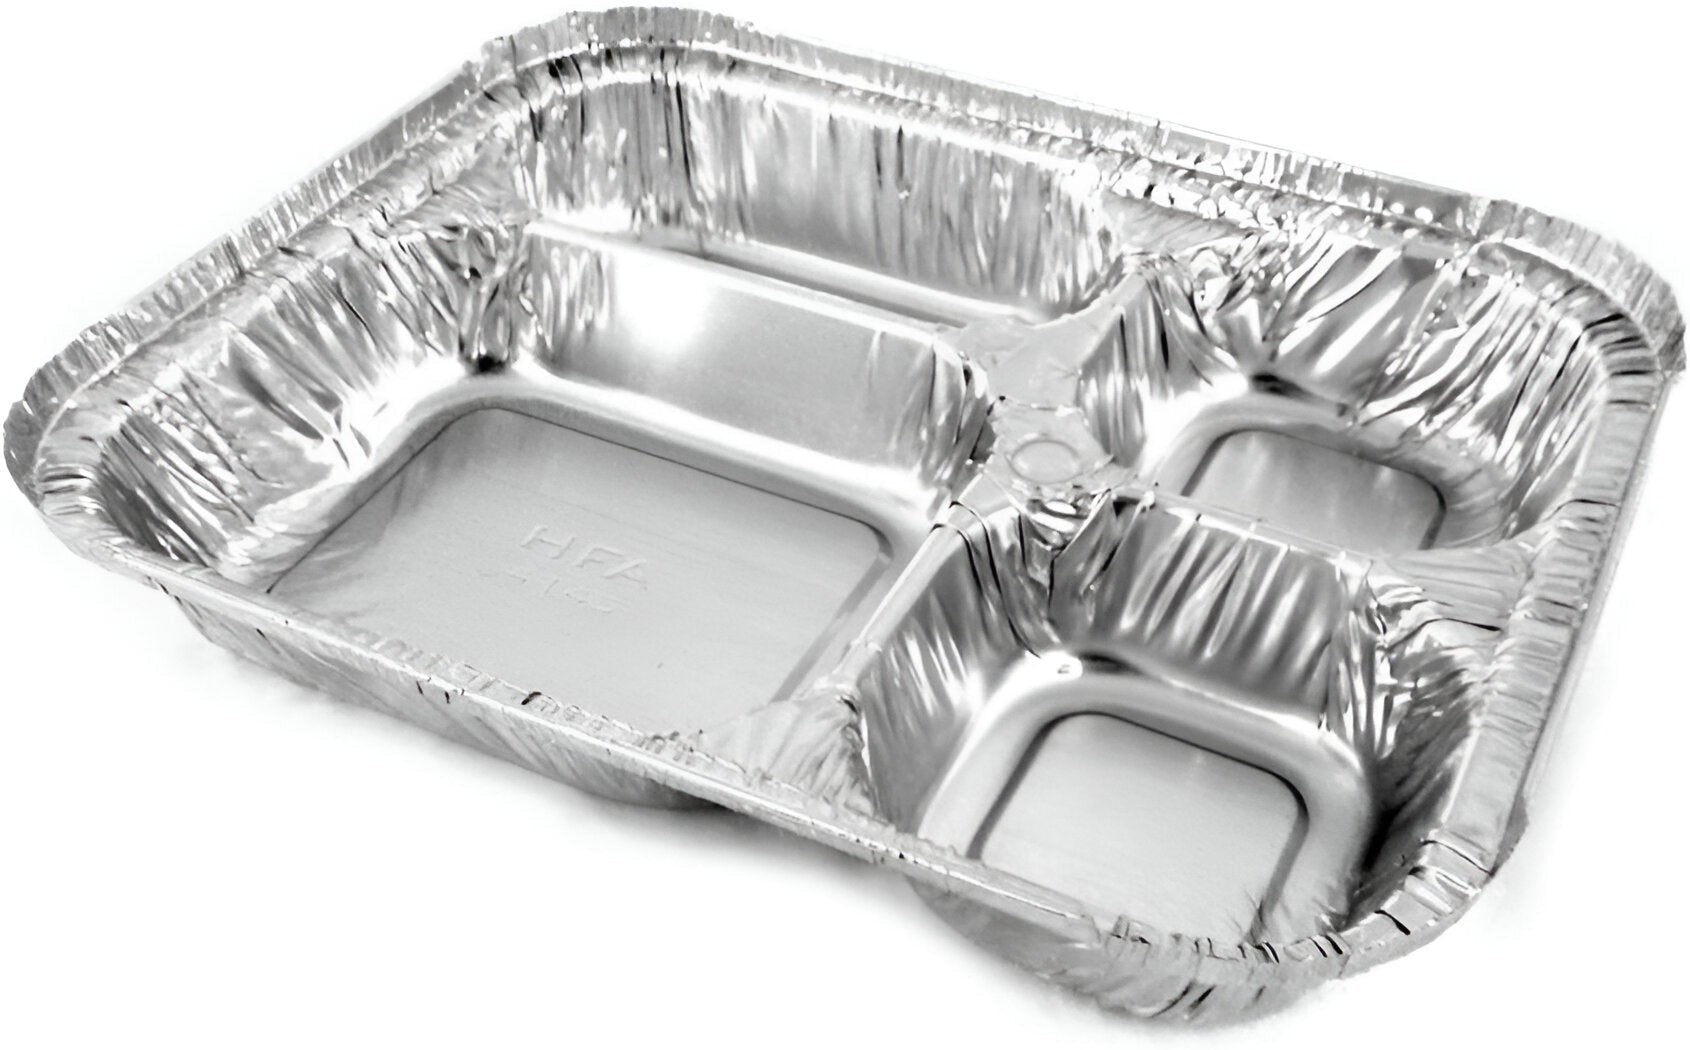 HFA - Oblong 4-Compartment Foil Tray with Lid, 250/Cs - 4145-00-250W